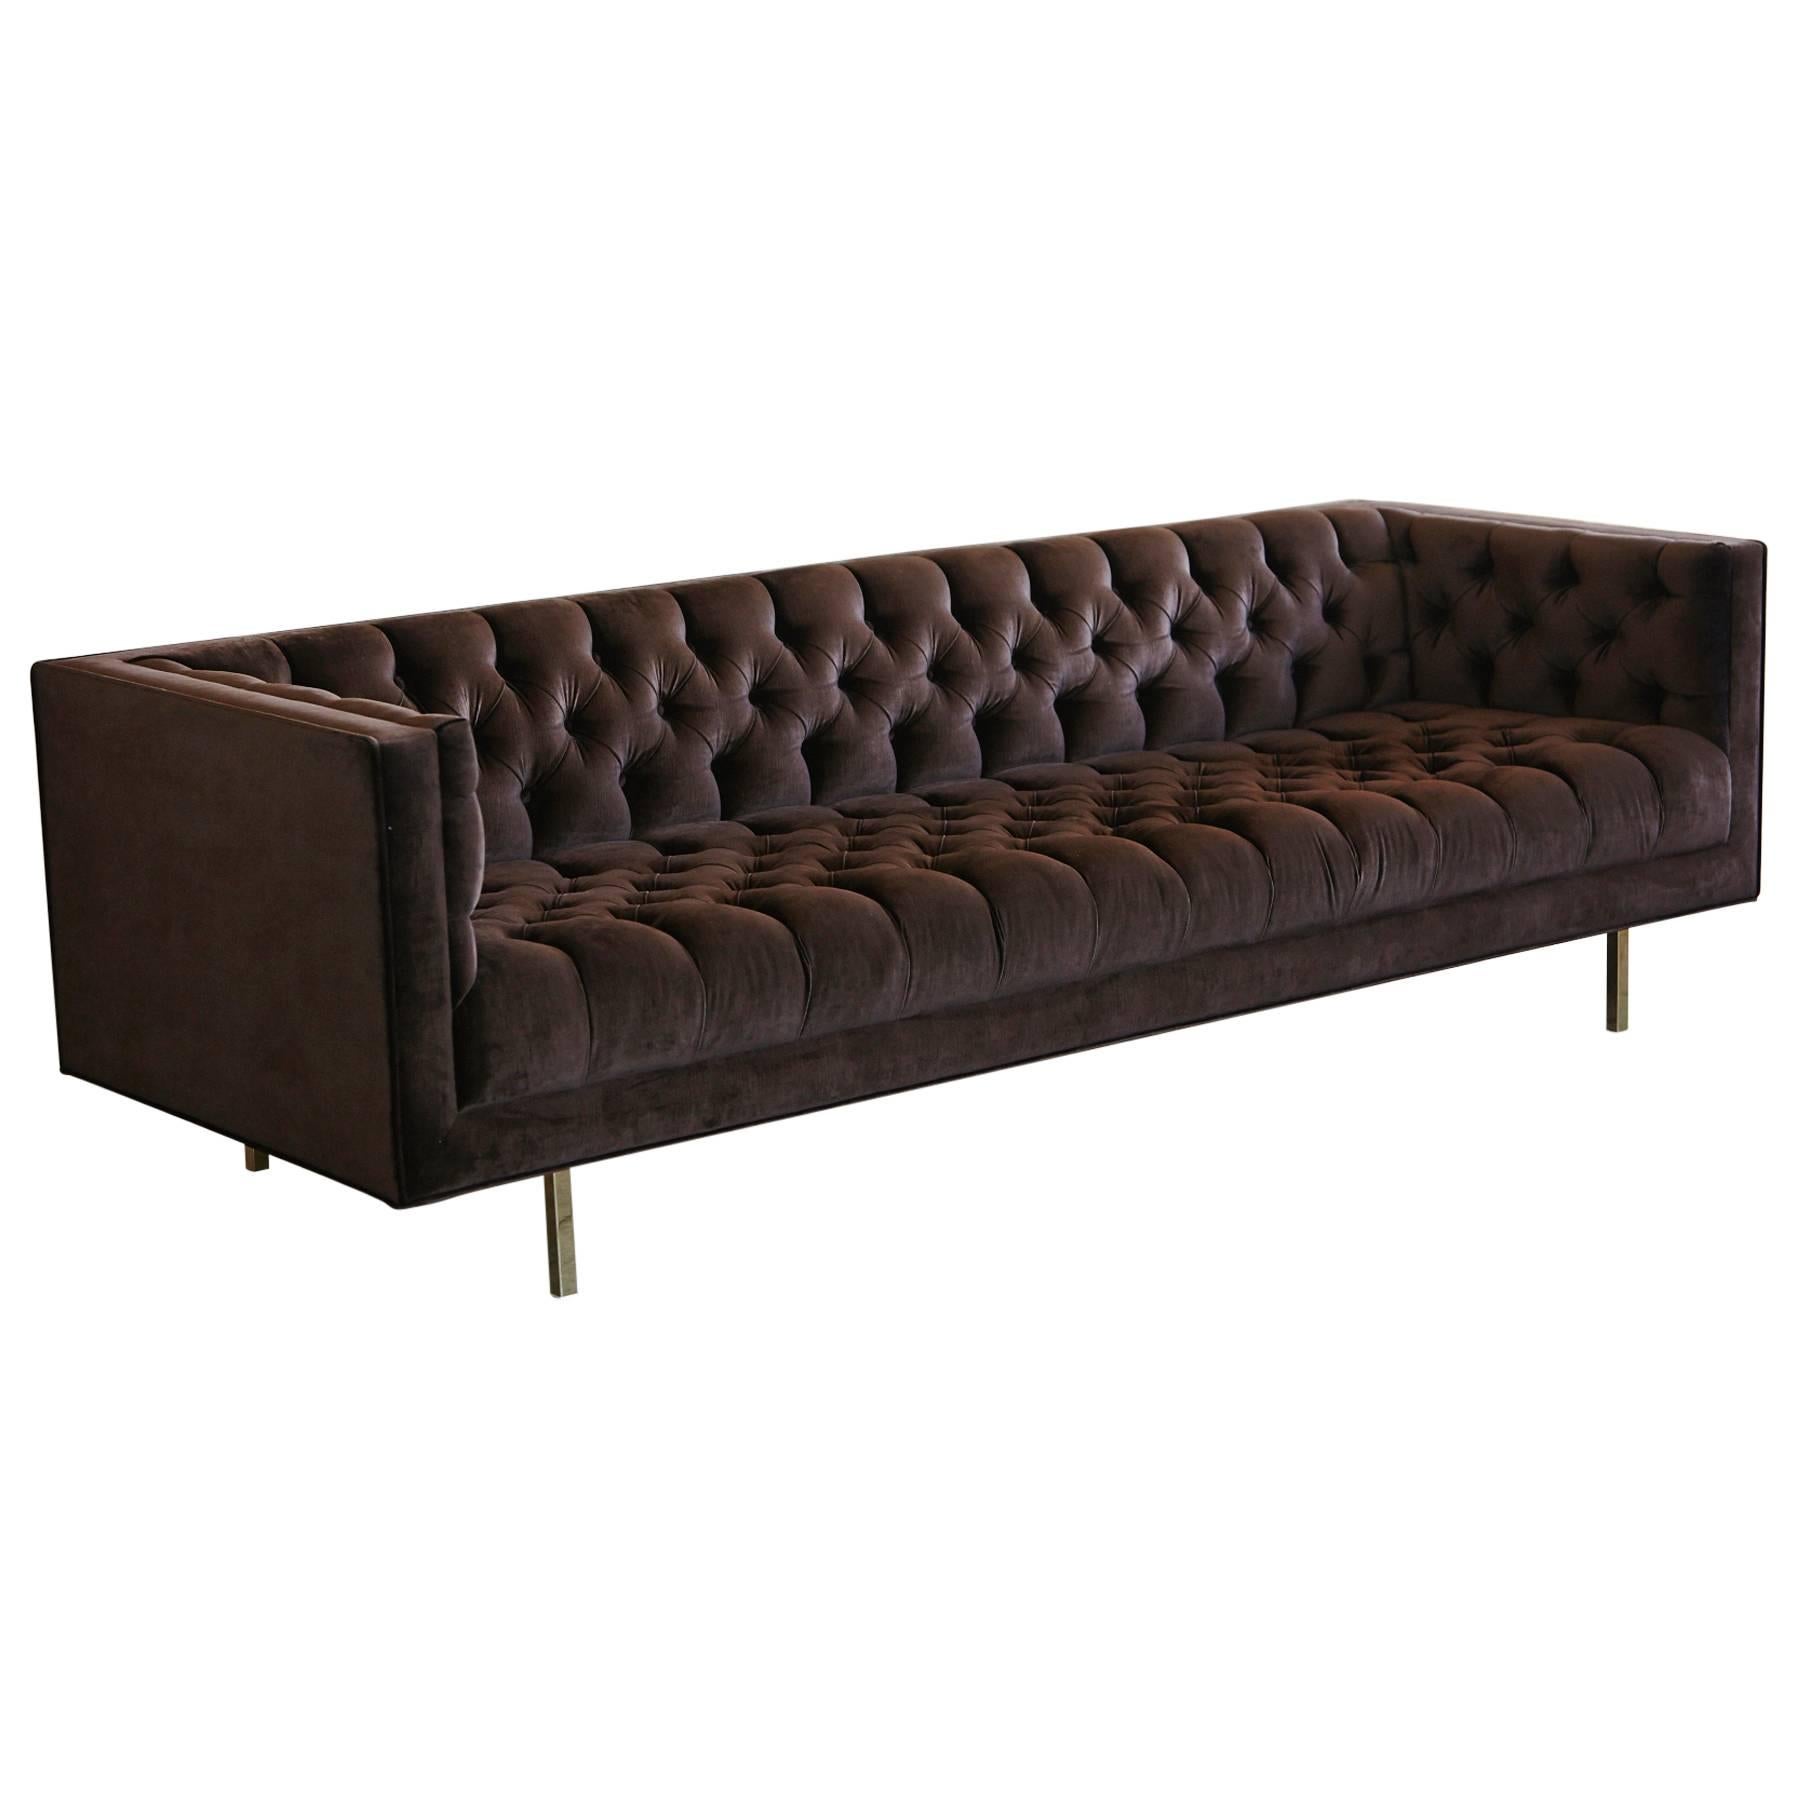 Modern Deeply Button Tufted Velvet Tuxedo Sofa in Chocolate Brown by Las Venus